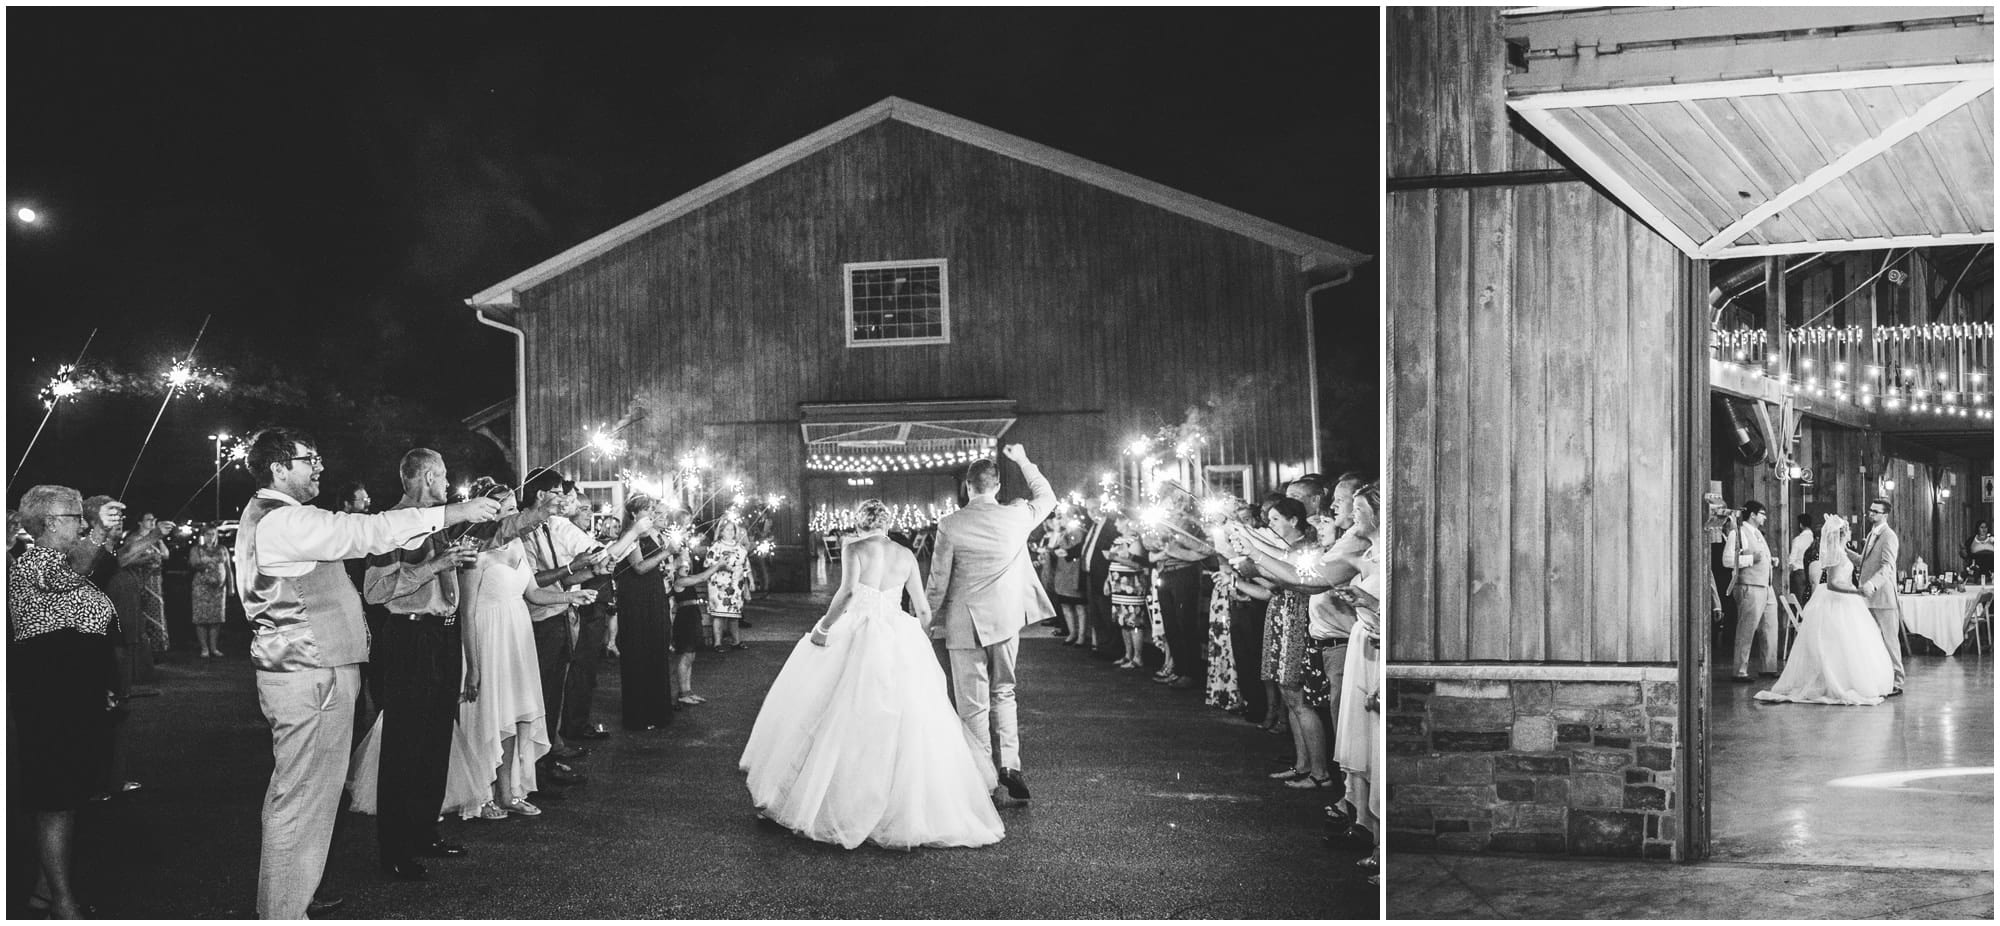 County Line Orchard Wedding Photographer sparkler exit and creative detail images